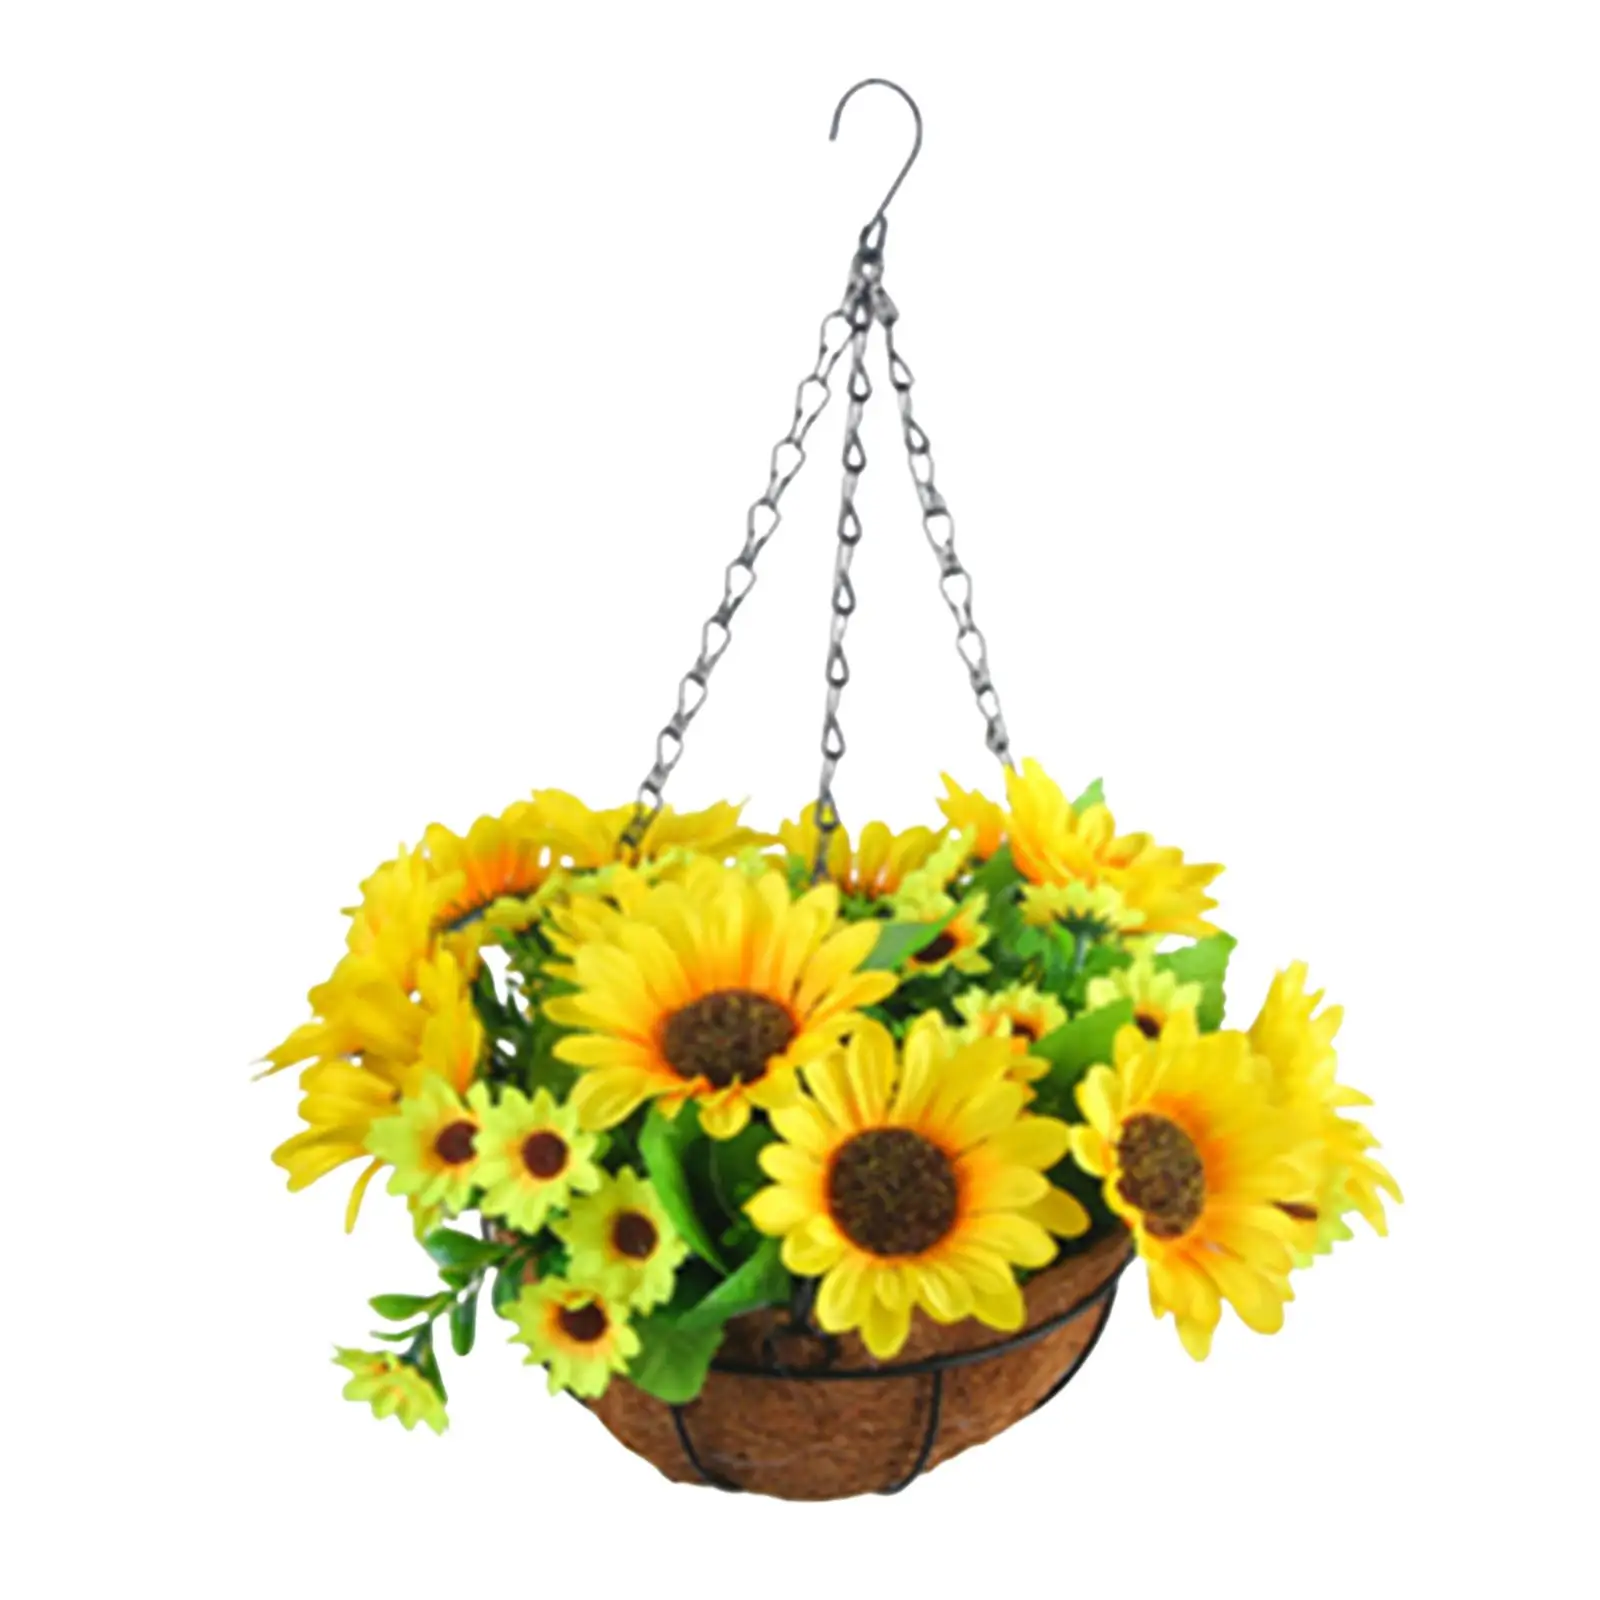 Artificial Hanging Flowers in Basket with Lining Basket Artificial Sunflower Bouquets for Home Outdoor Kitchen Tabletop Bathroom